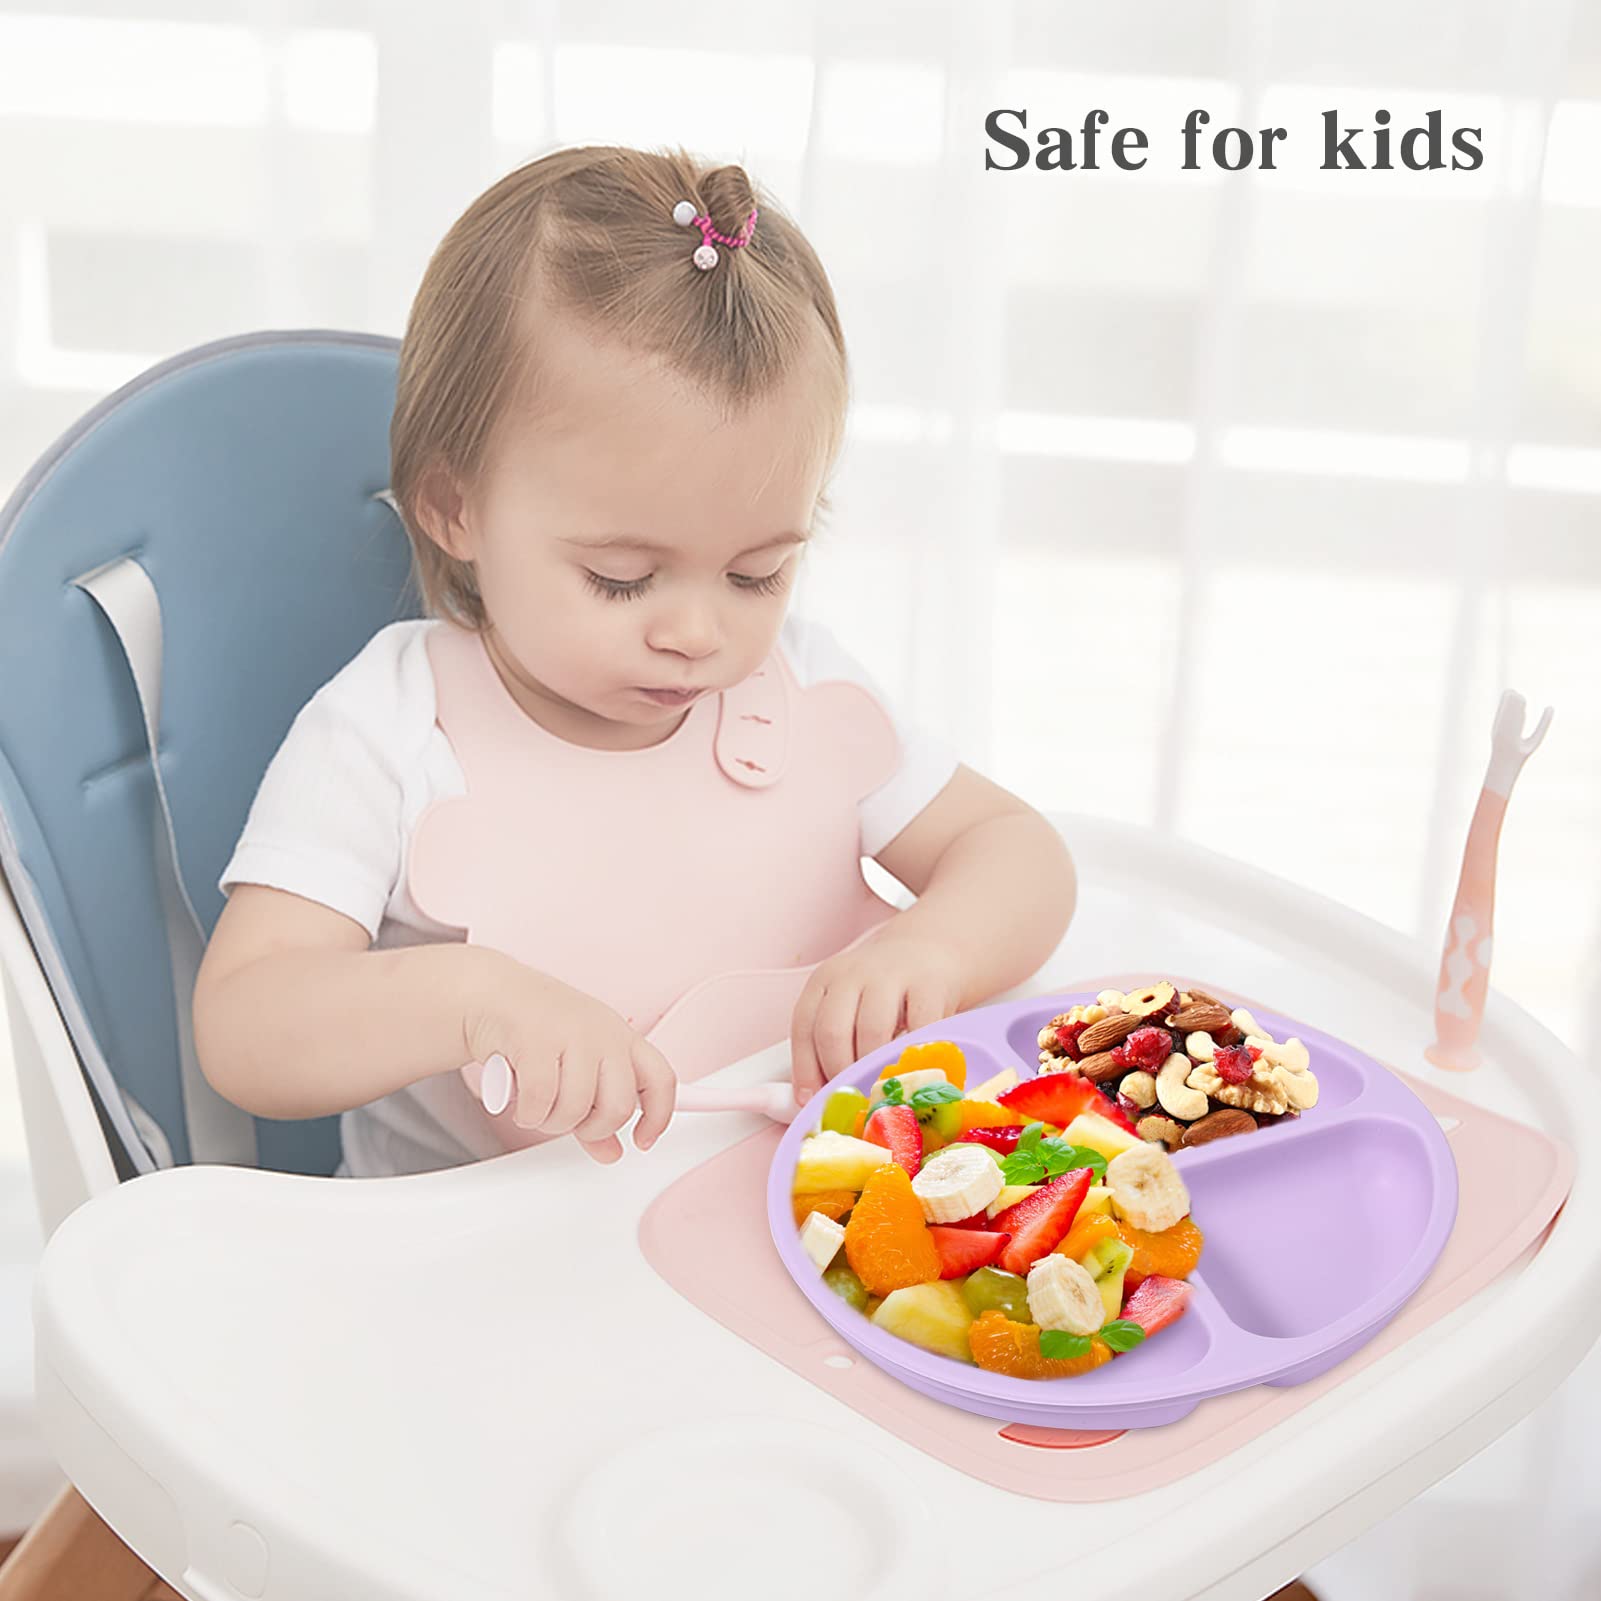 Cibeat 3pcs Toddler Plates with Suction, 100% Safe BPA Free Soft Toddler Plates Silicone Divided Plates, Portable Dinner Plates for Kids, Dishwasher, Microwave and Oven Safe